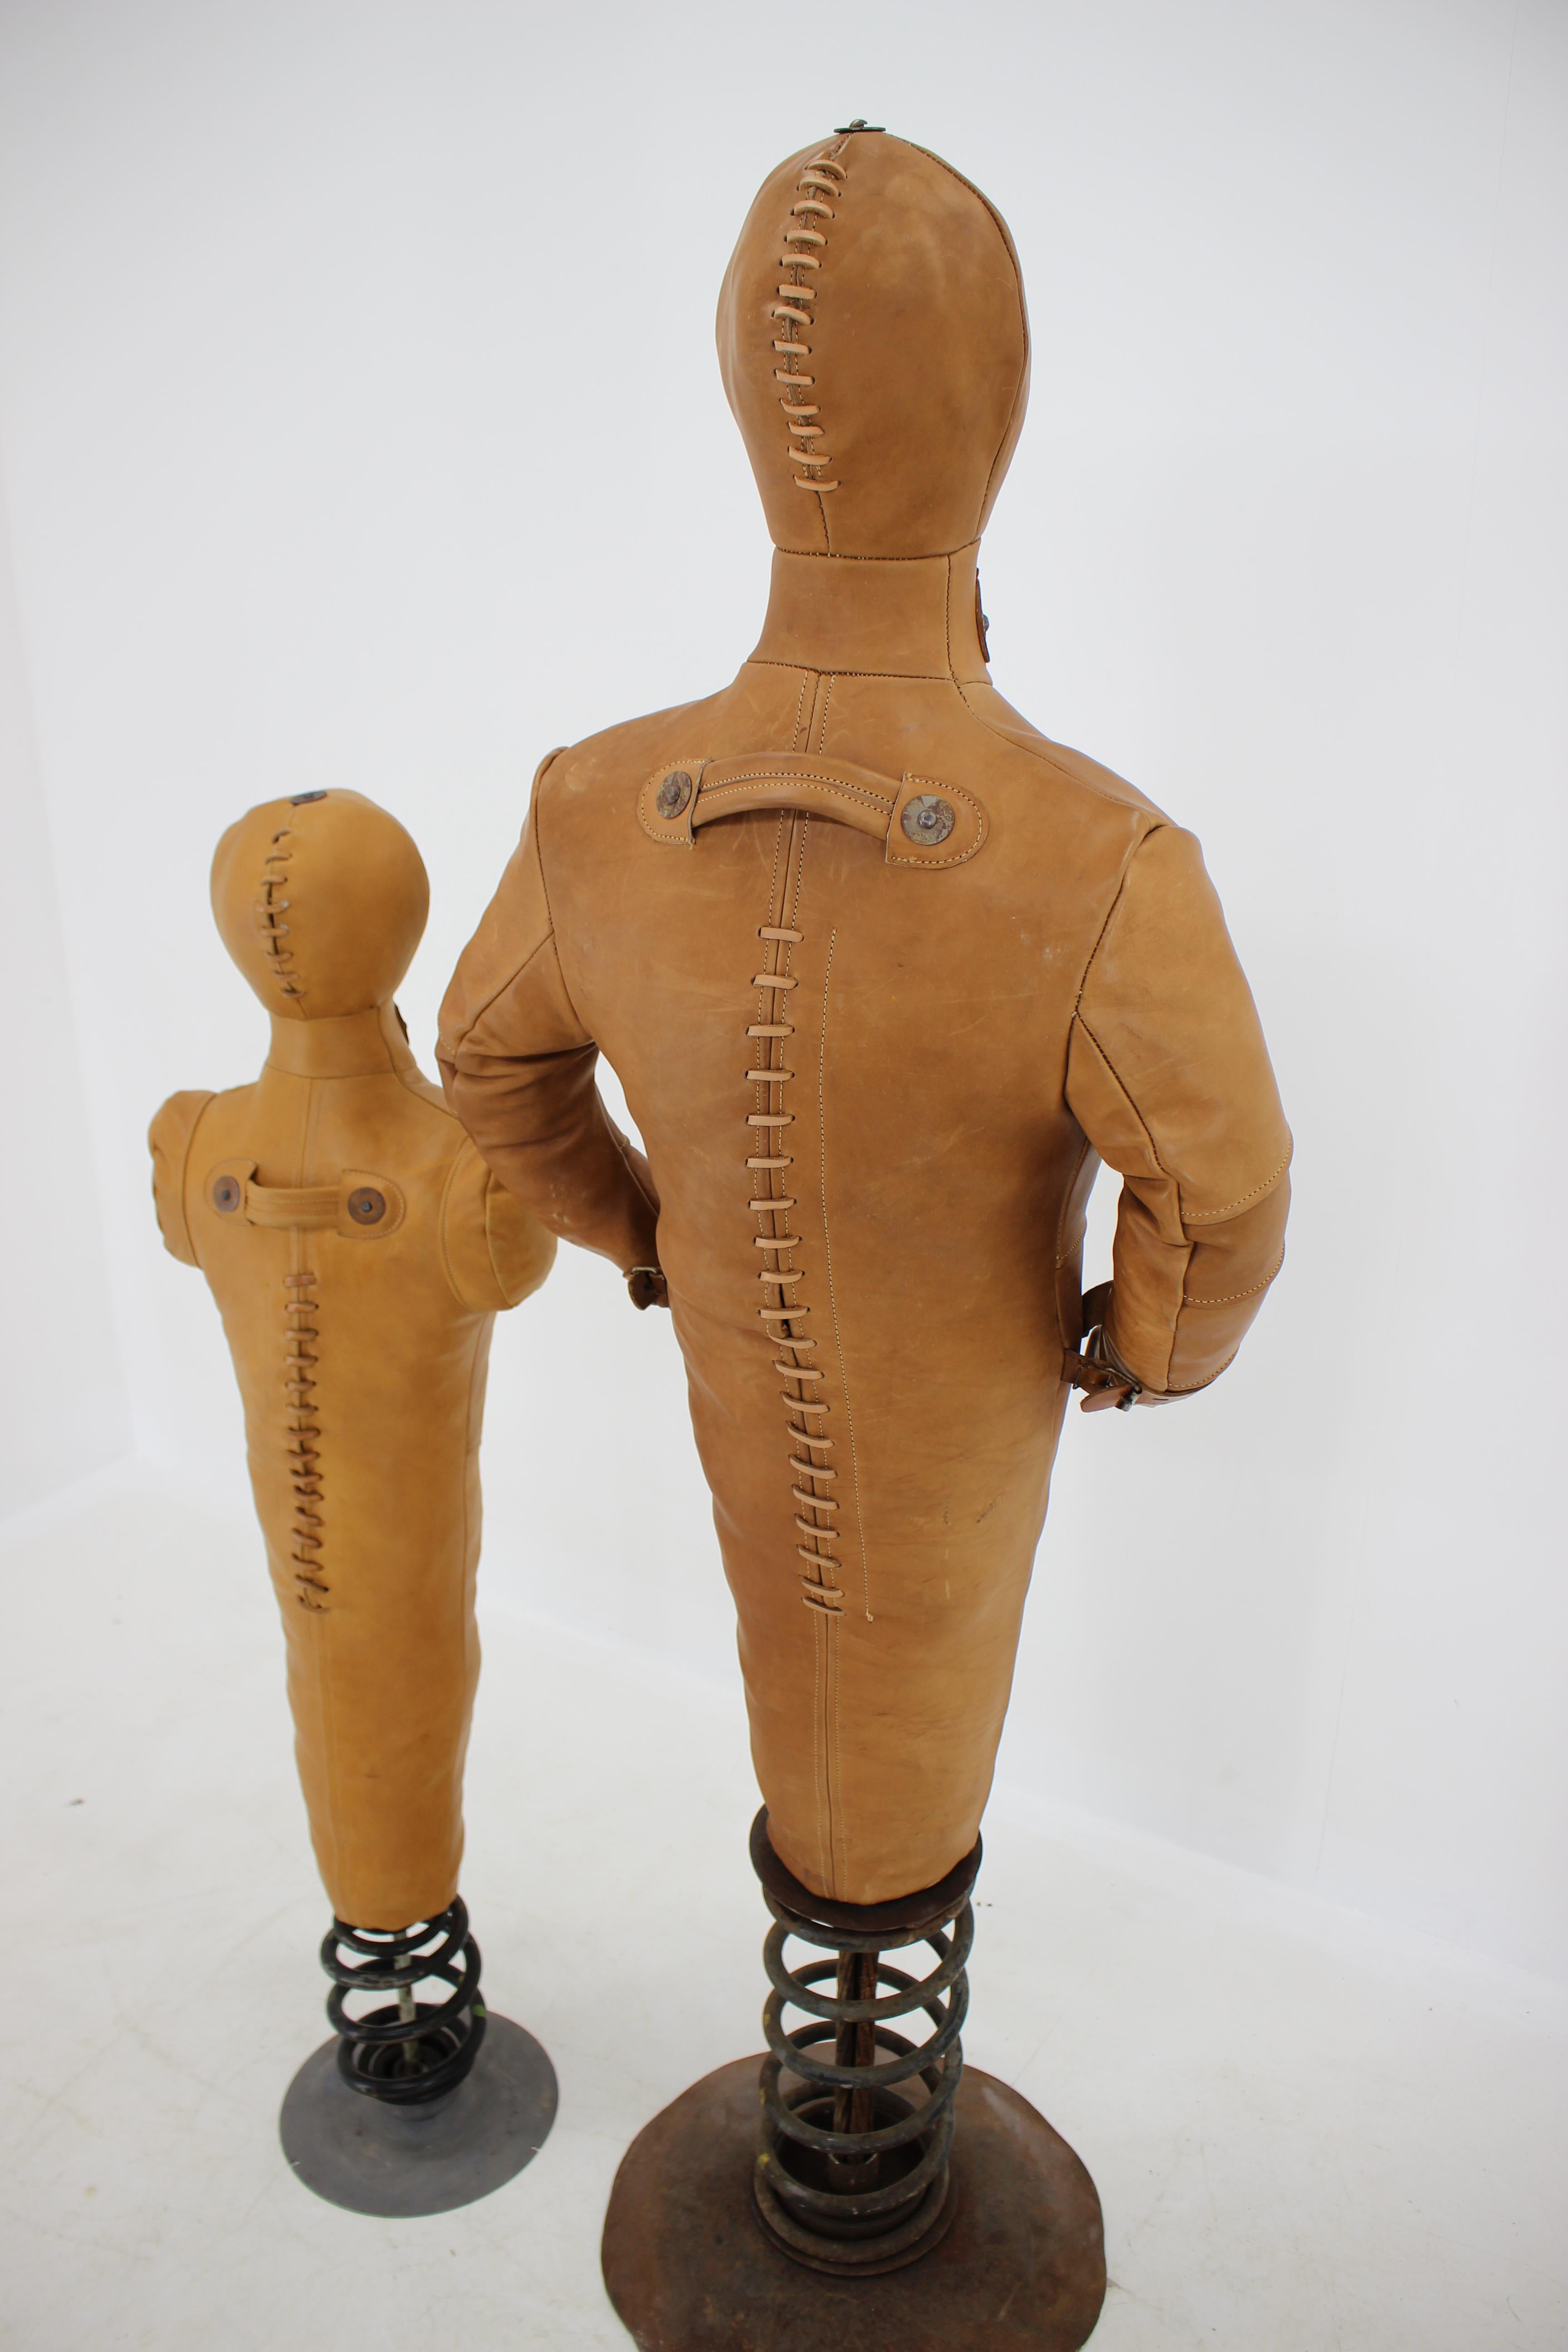 Set of two leather punching dummies on a heavy metal stands. Handmade in Czech Republic. Very good condition - no effects.
Height of the bigger one: 178cm
Height of the smaller one: 136cm.